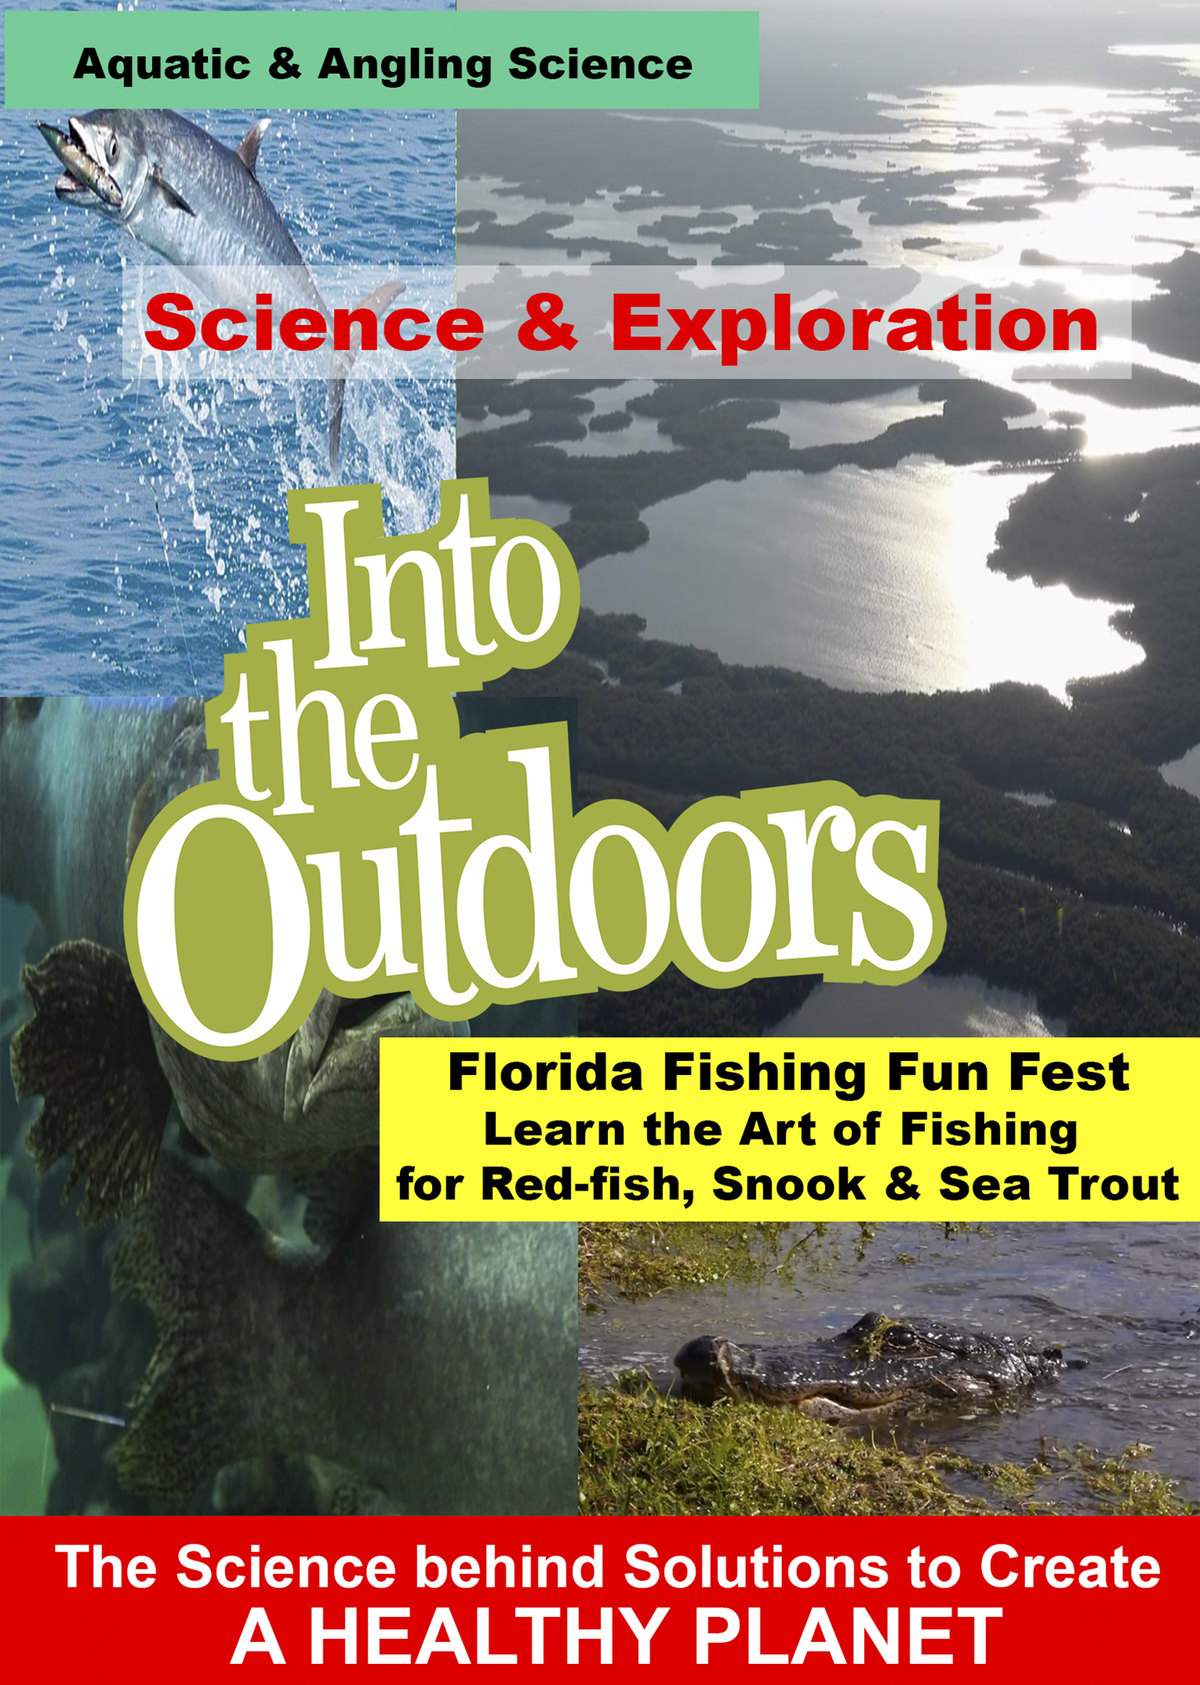 K5008 - Florida Fishing Fun Fest - Learn the Art of Fishing for Red-fish, Snook & Sea Trout